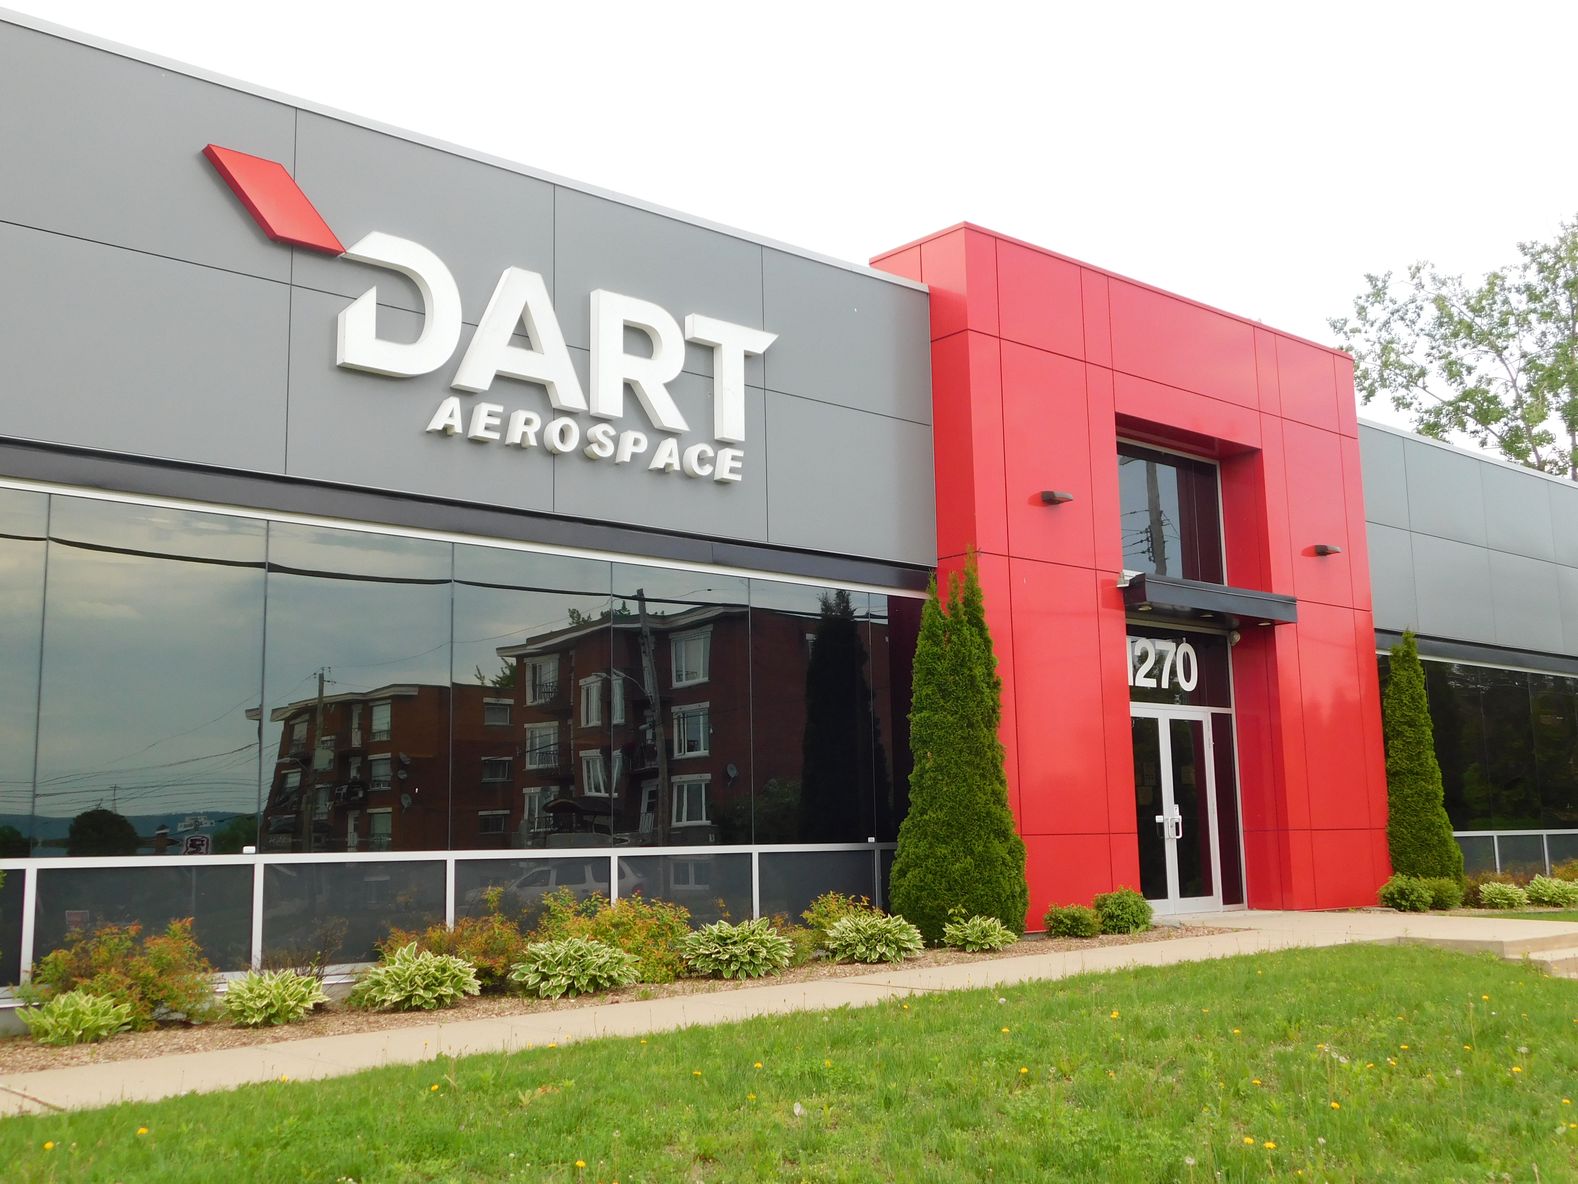 TransDigm Group now owns Dart Aerospace